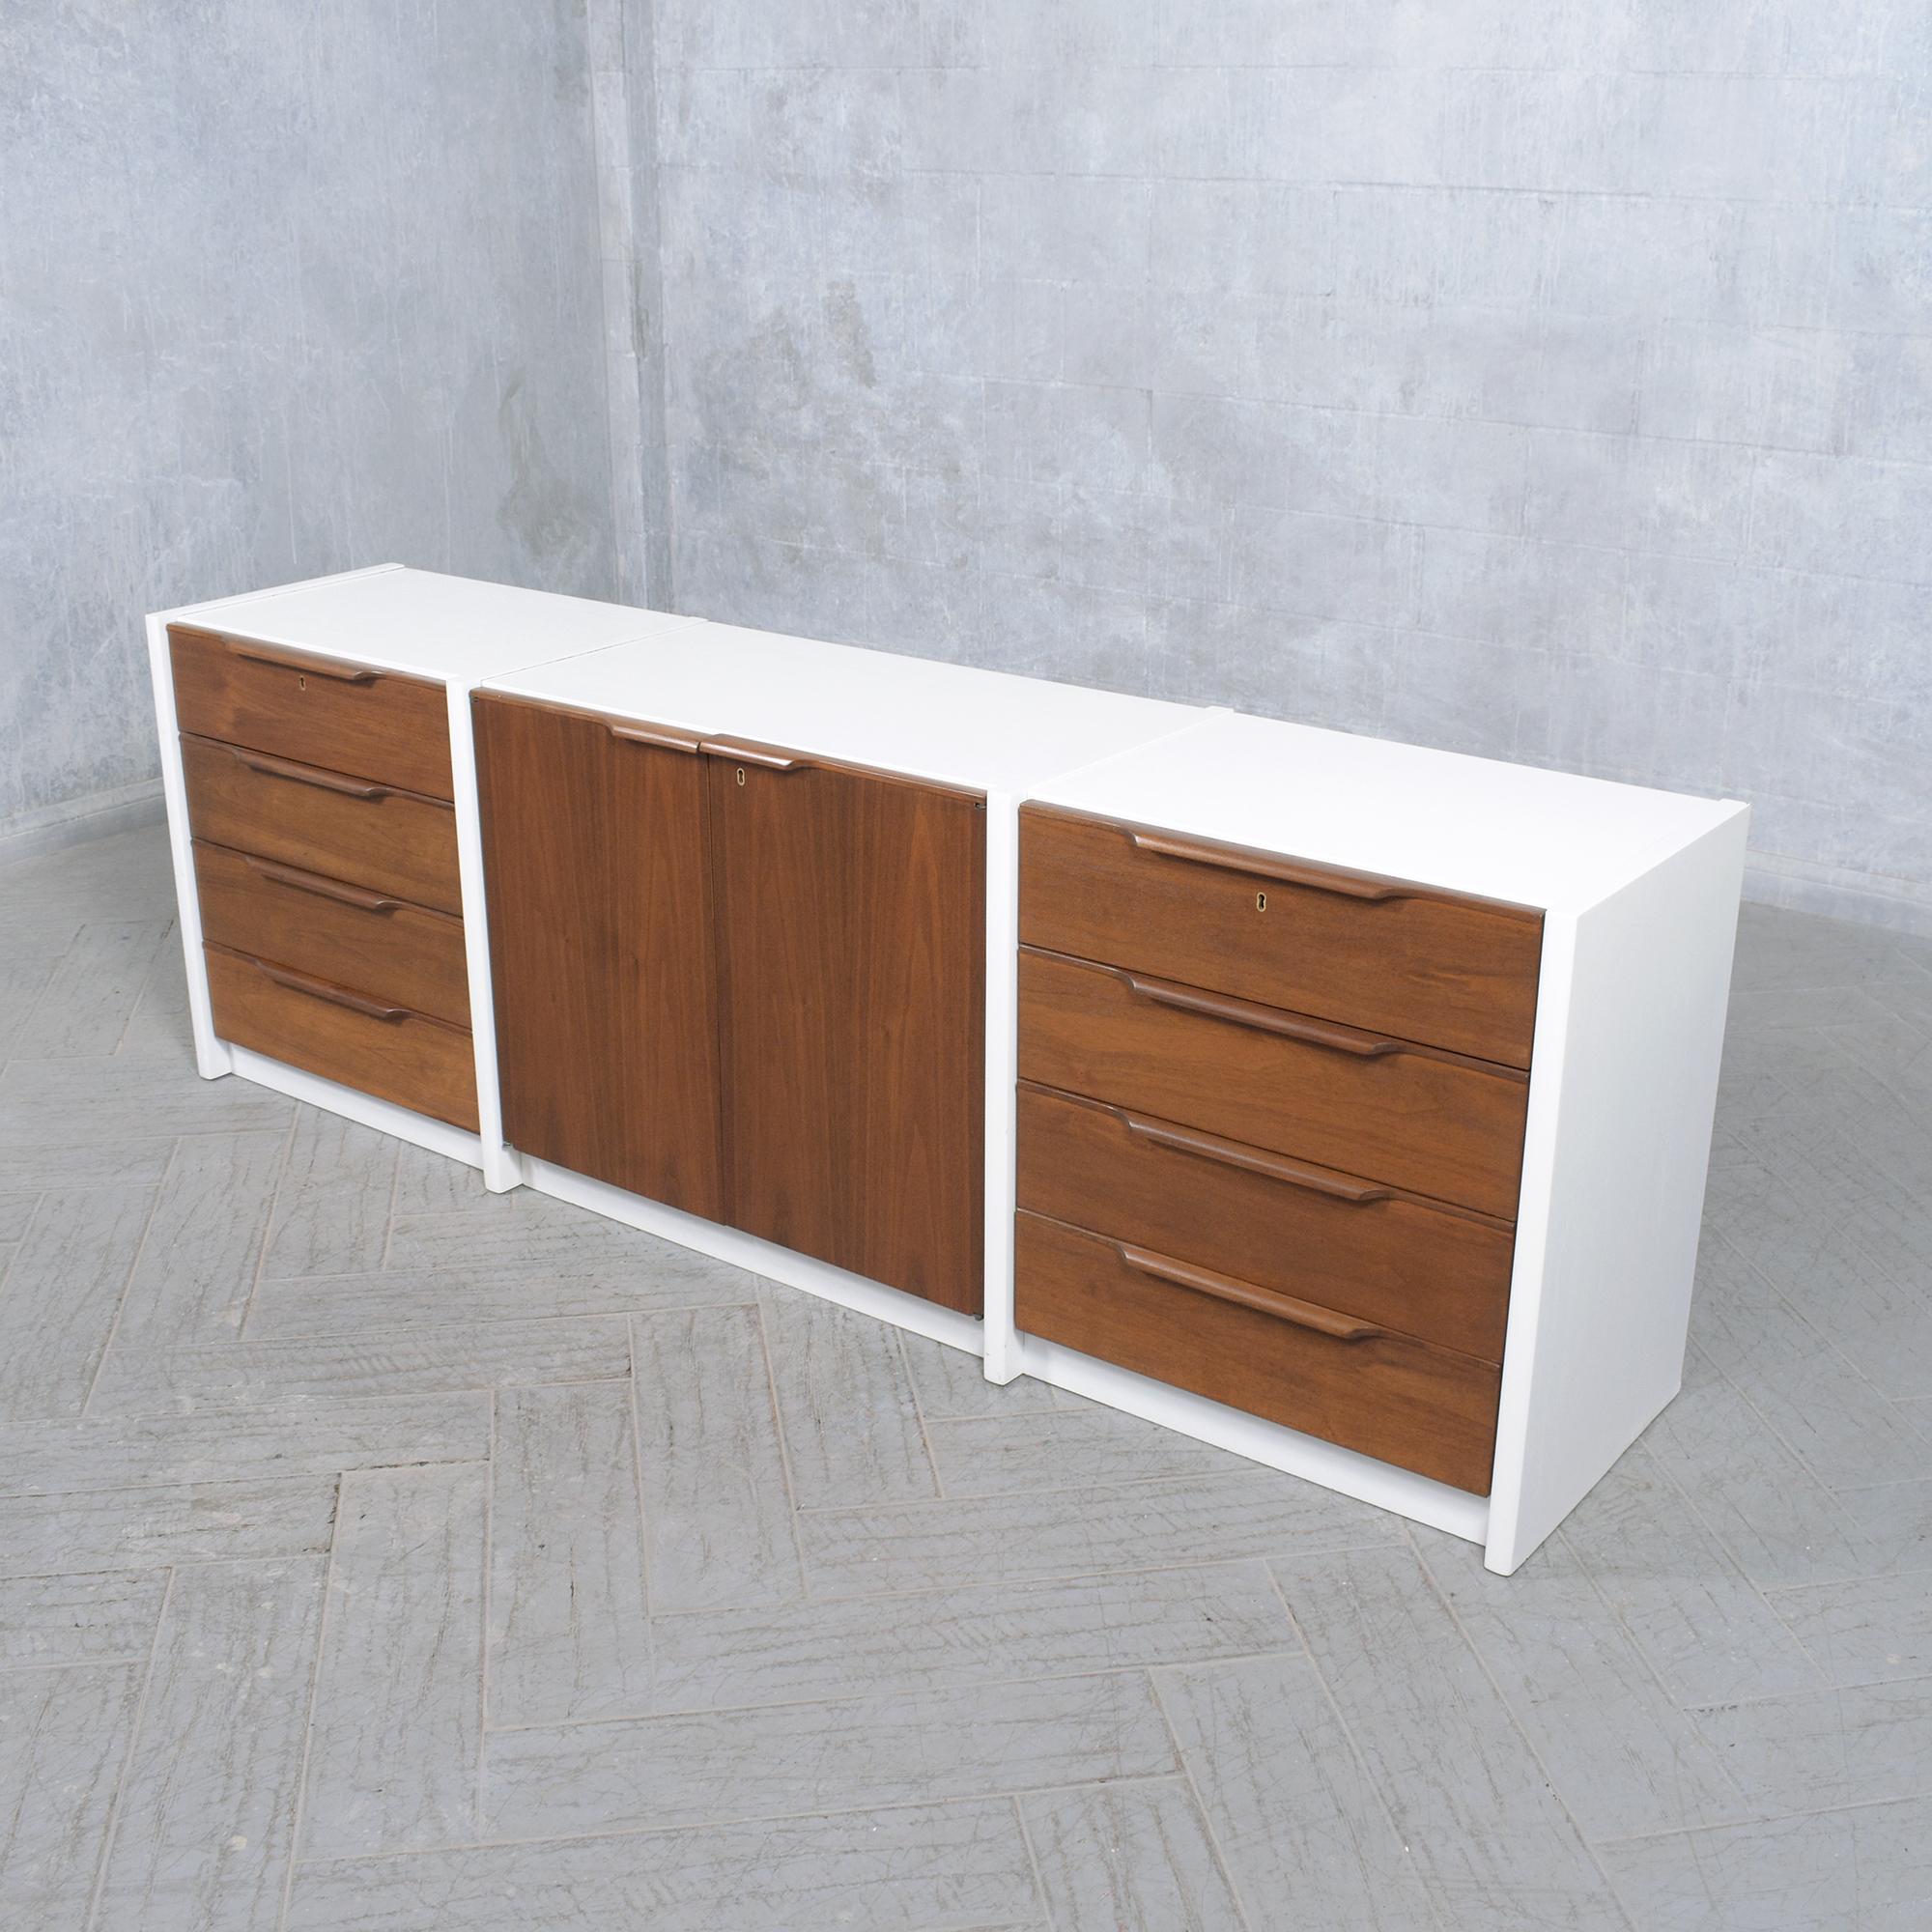 1960s Danish Executive Cabinet: Mid-Century Design and Craftsmanship For Sale 3